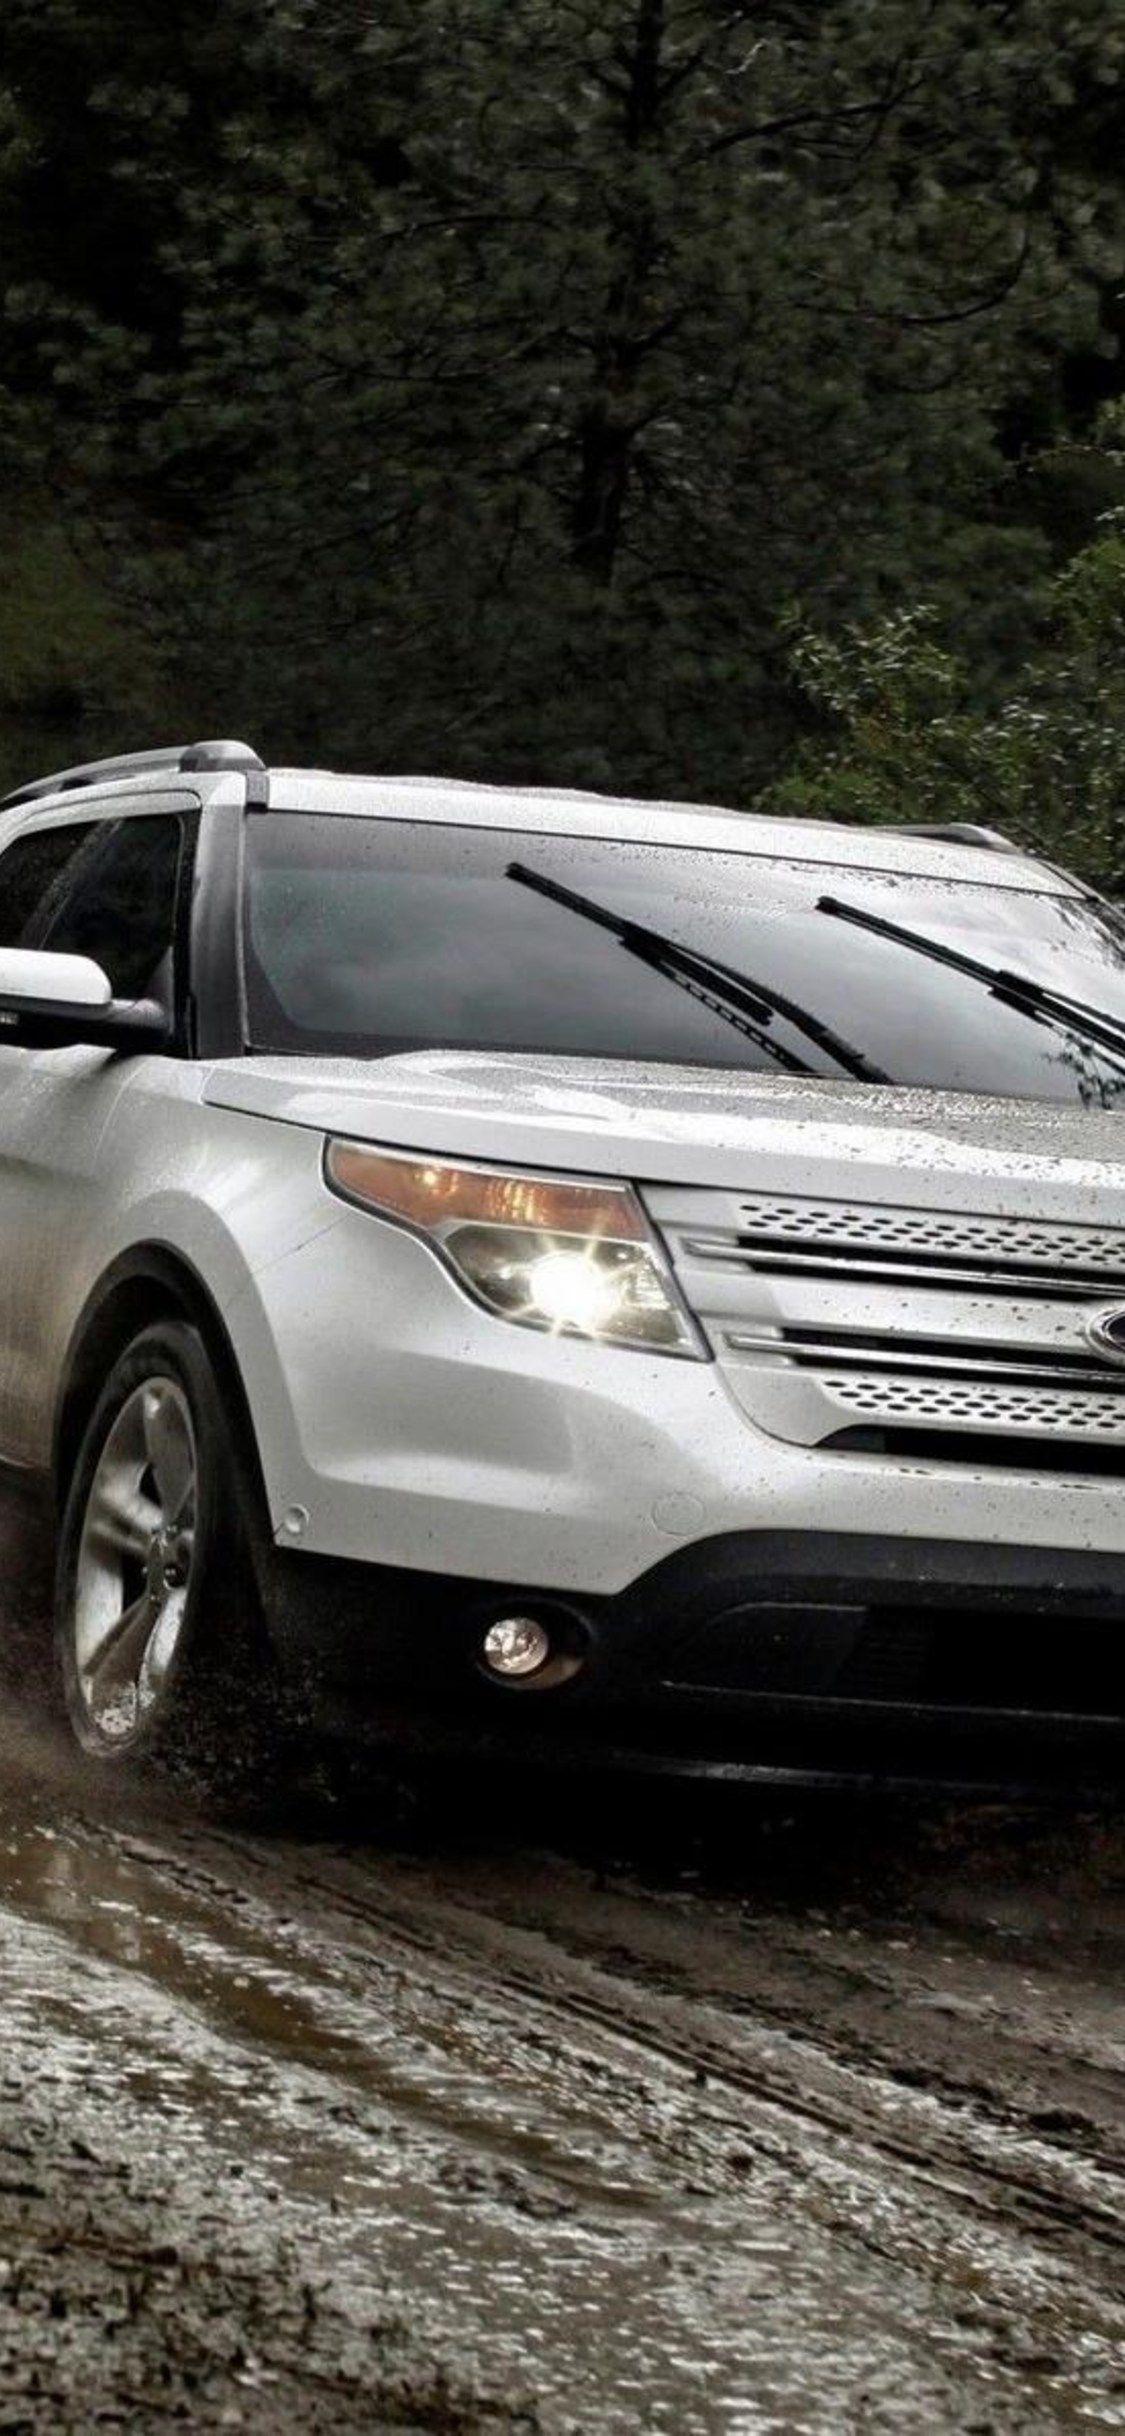 Ford Explorer iPhone XS, iPhone iPhone X HD 4k